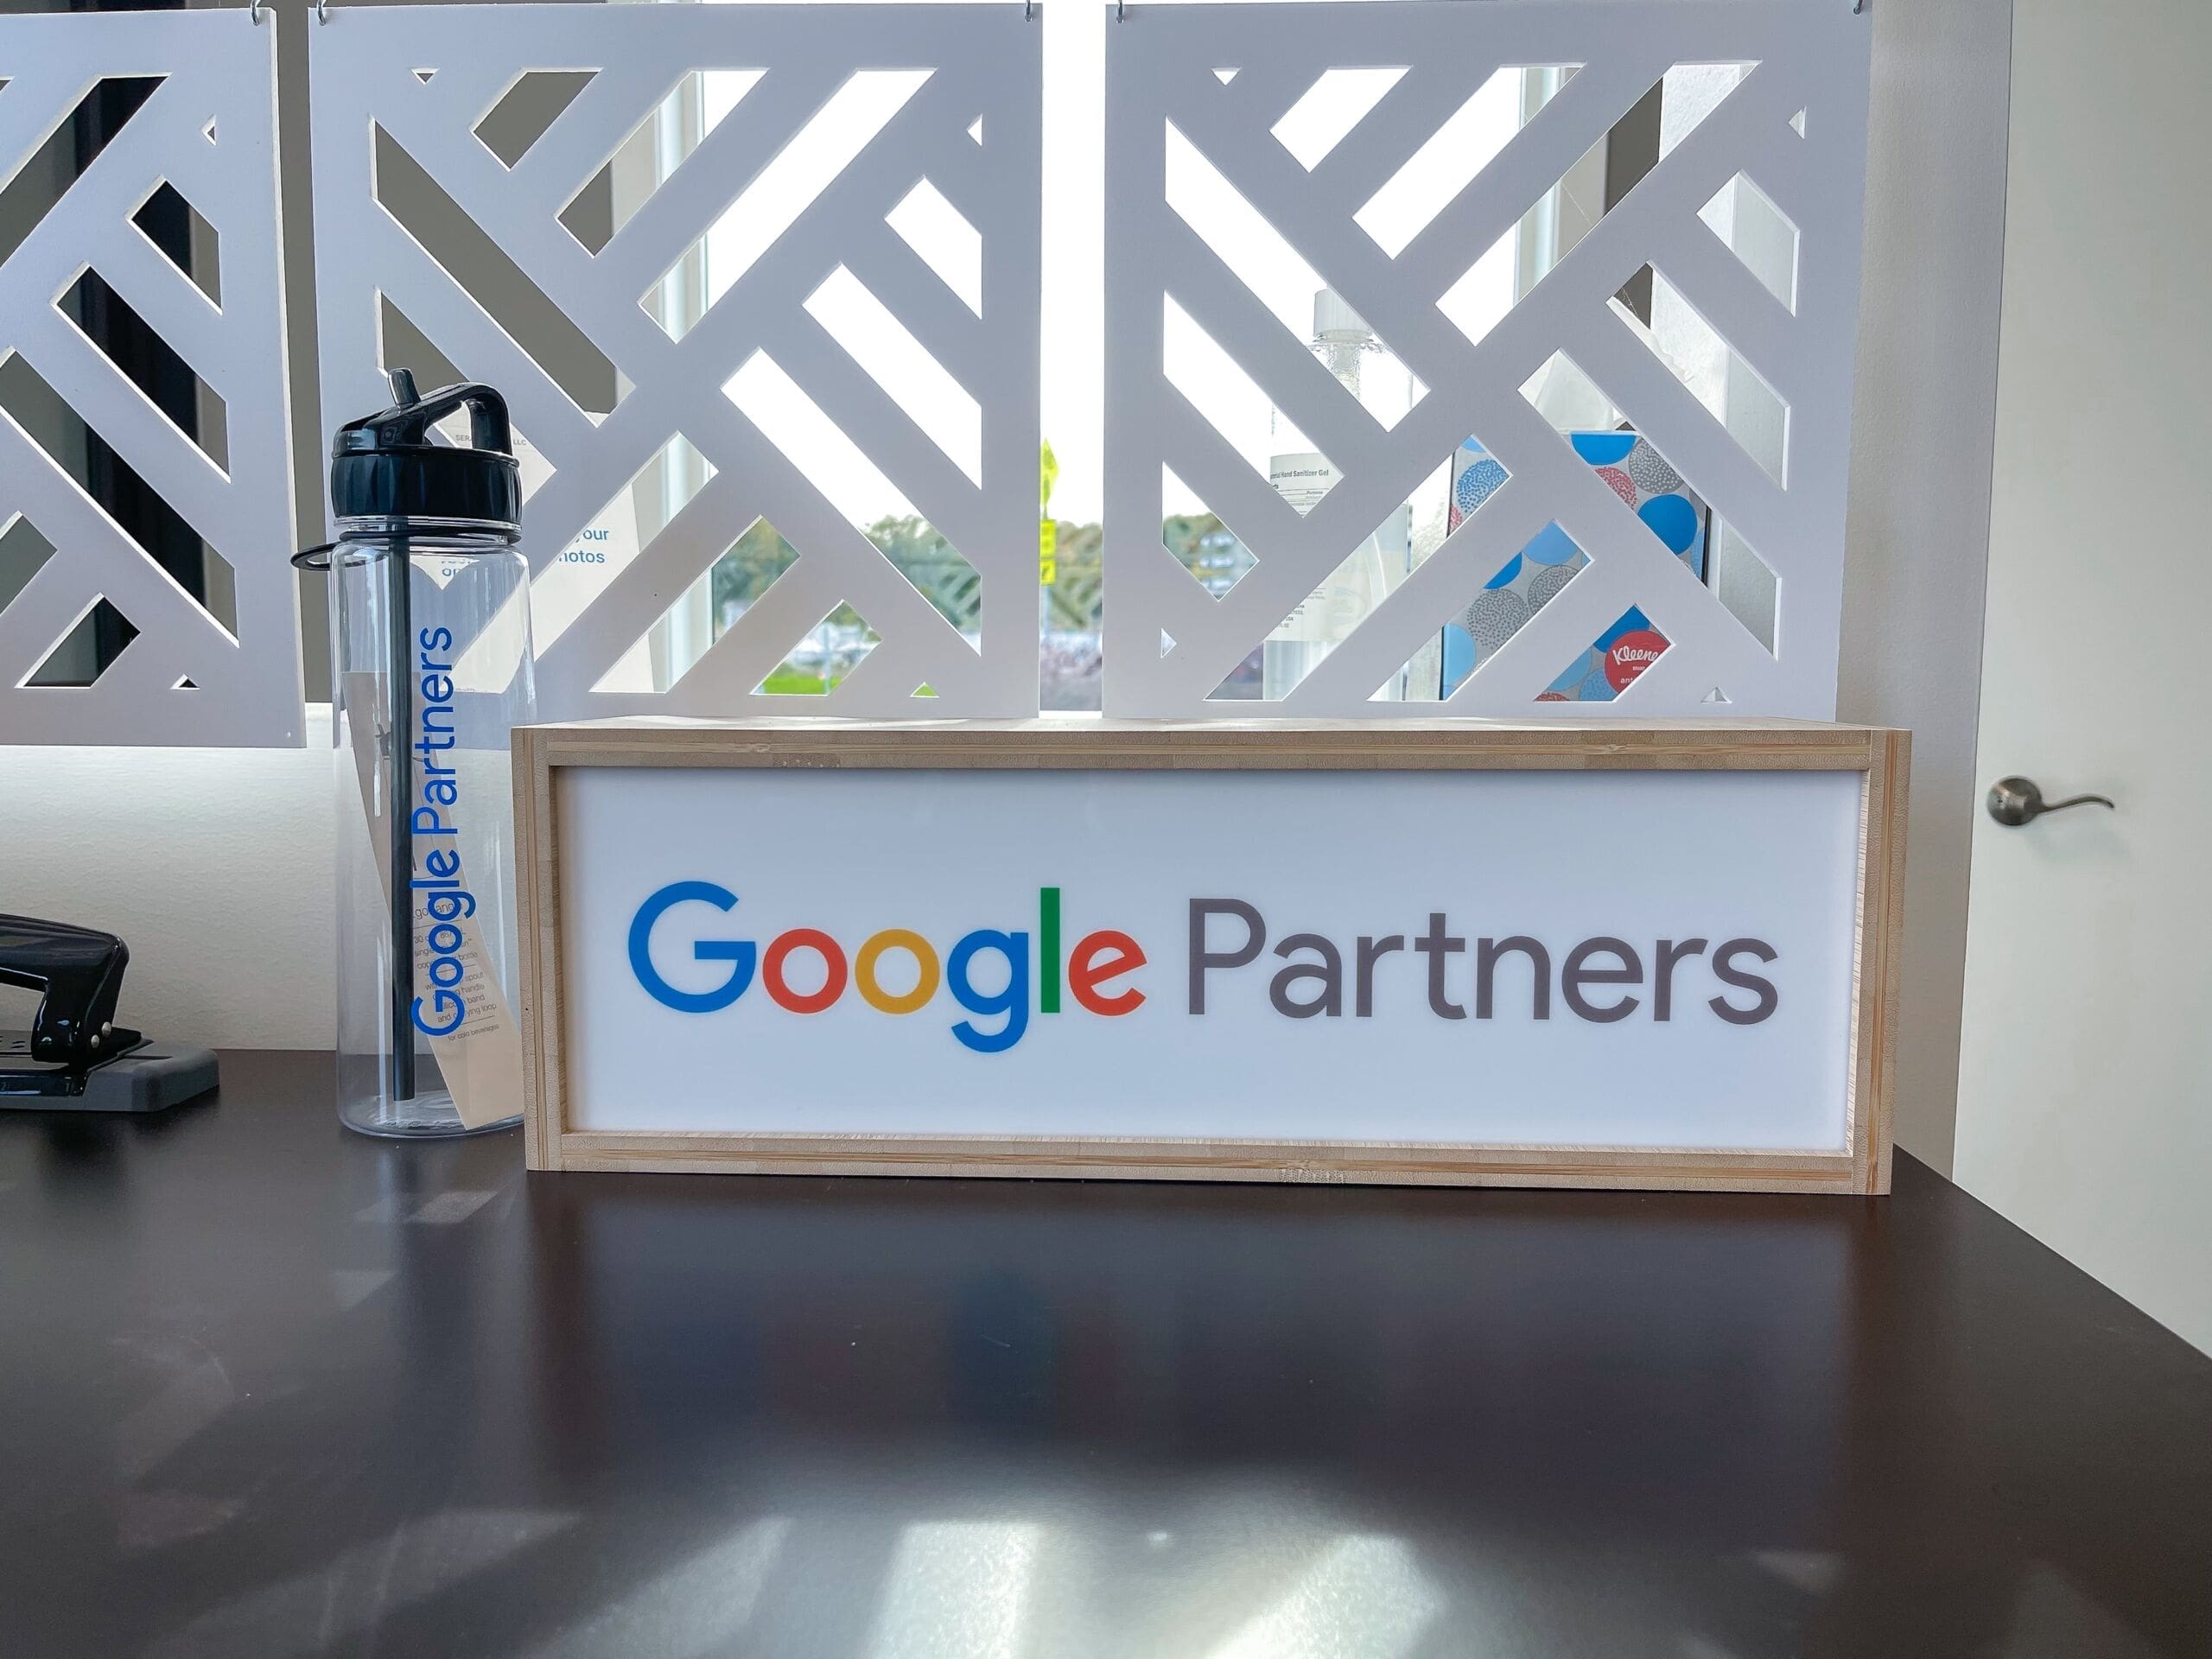 google partners light box and water bottle